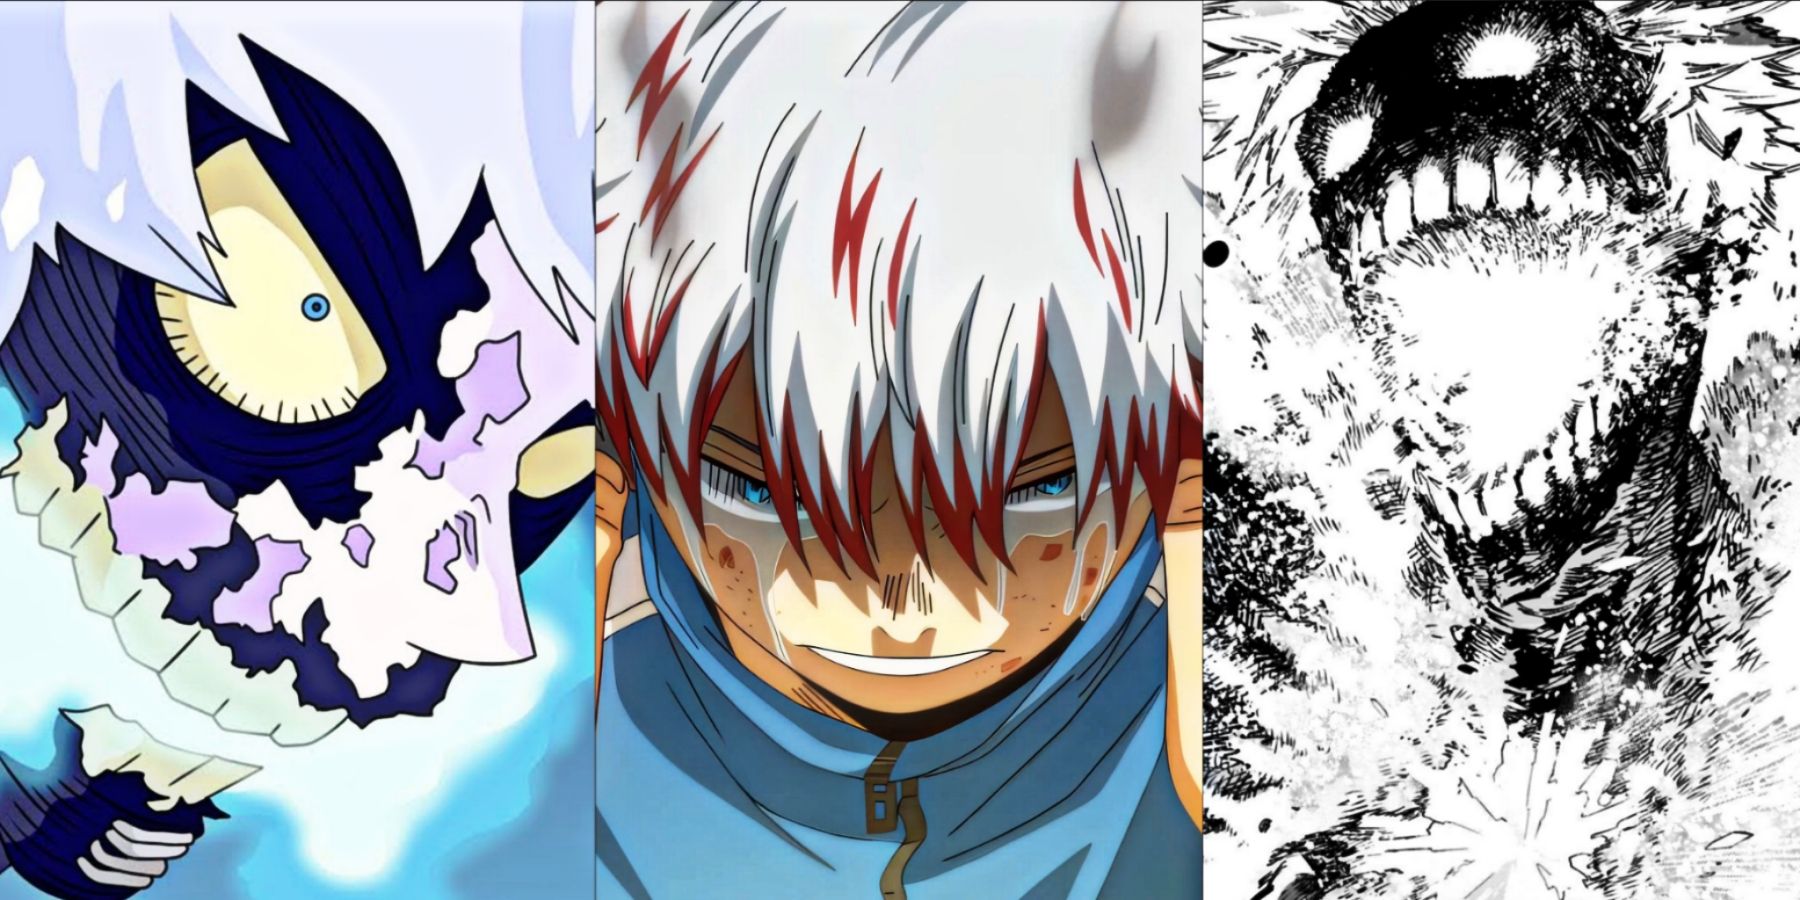 What evidence is there that Dabi is Toya Todoroki? - Quora